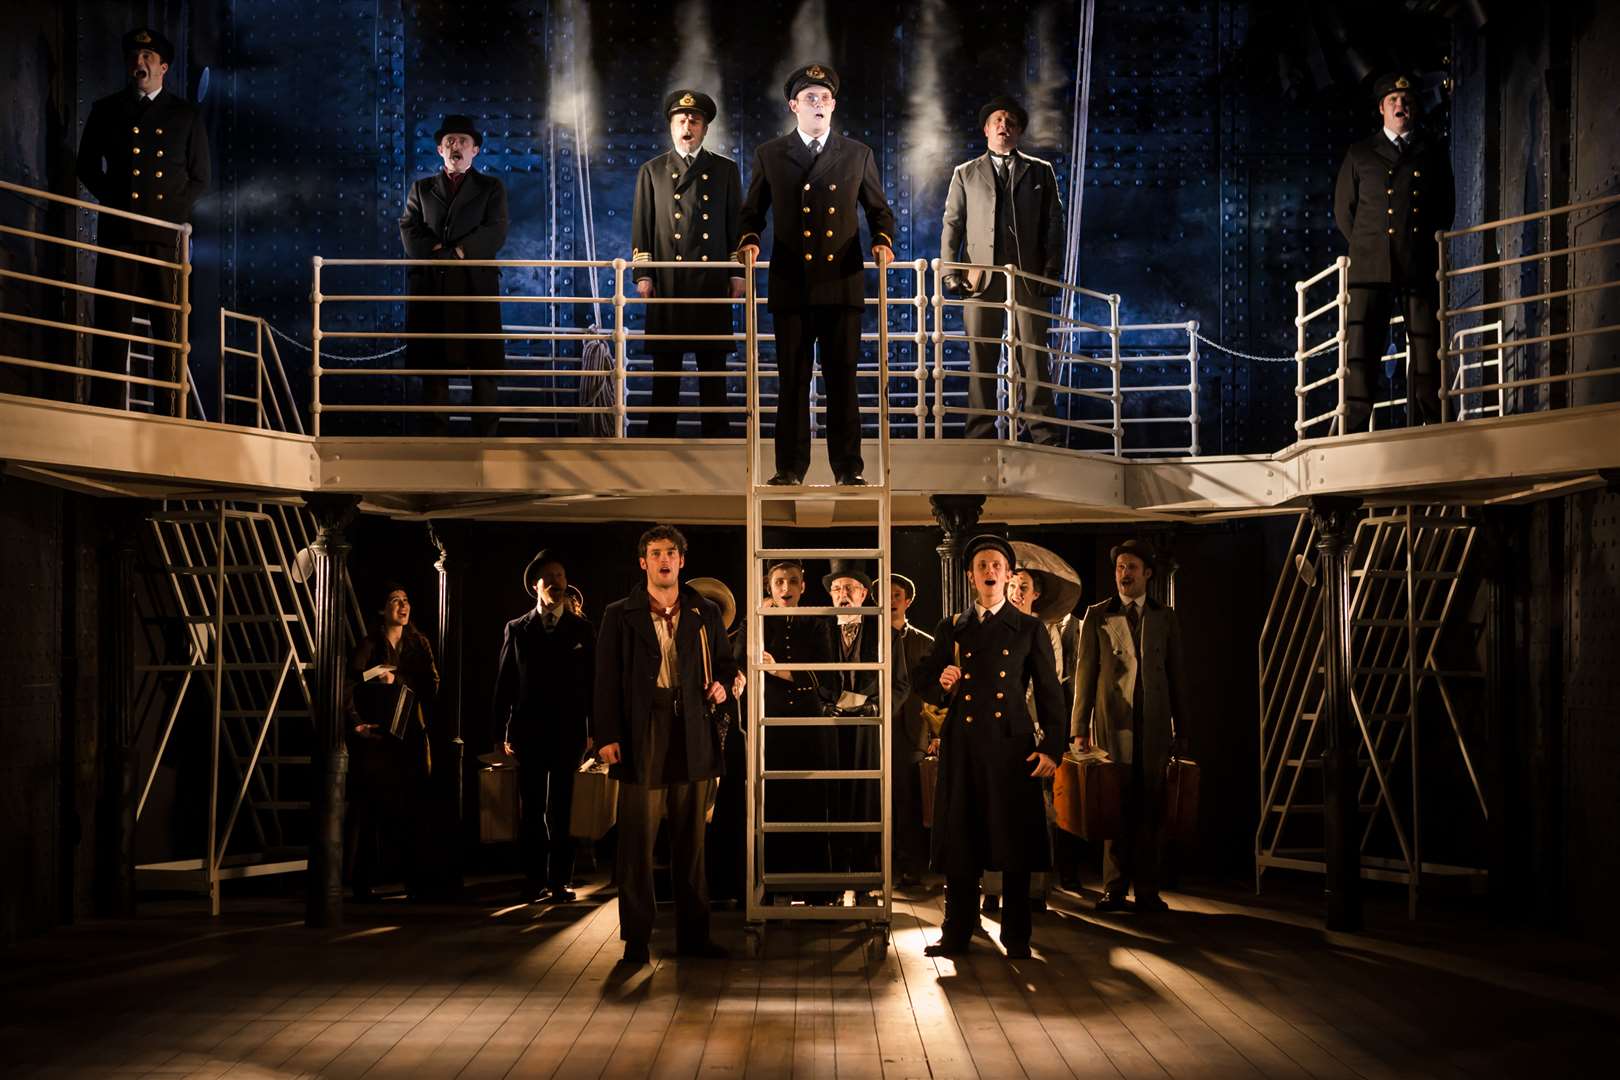 Titanic the Musical will be at the Churchill Theatre. Bromley